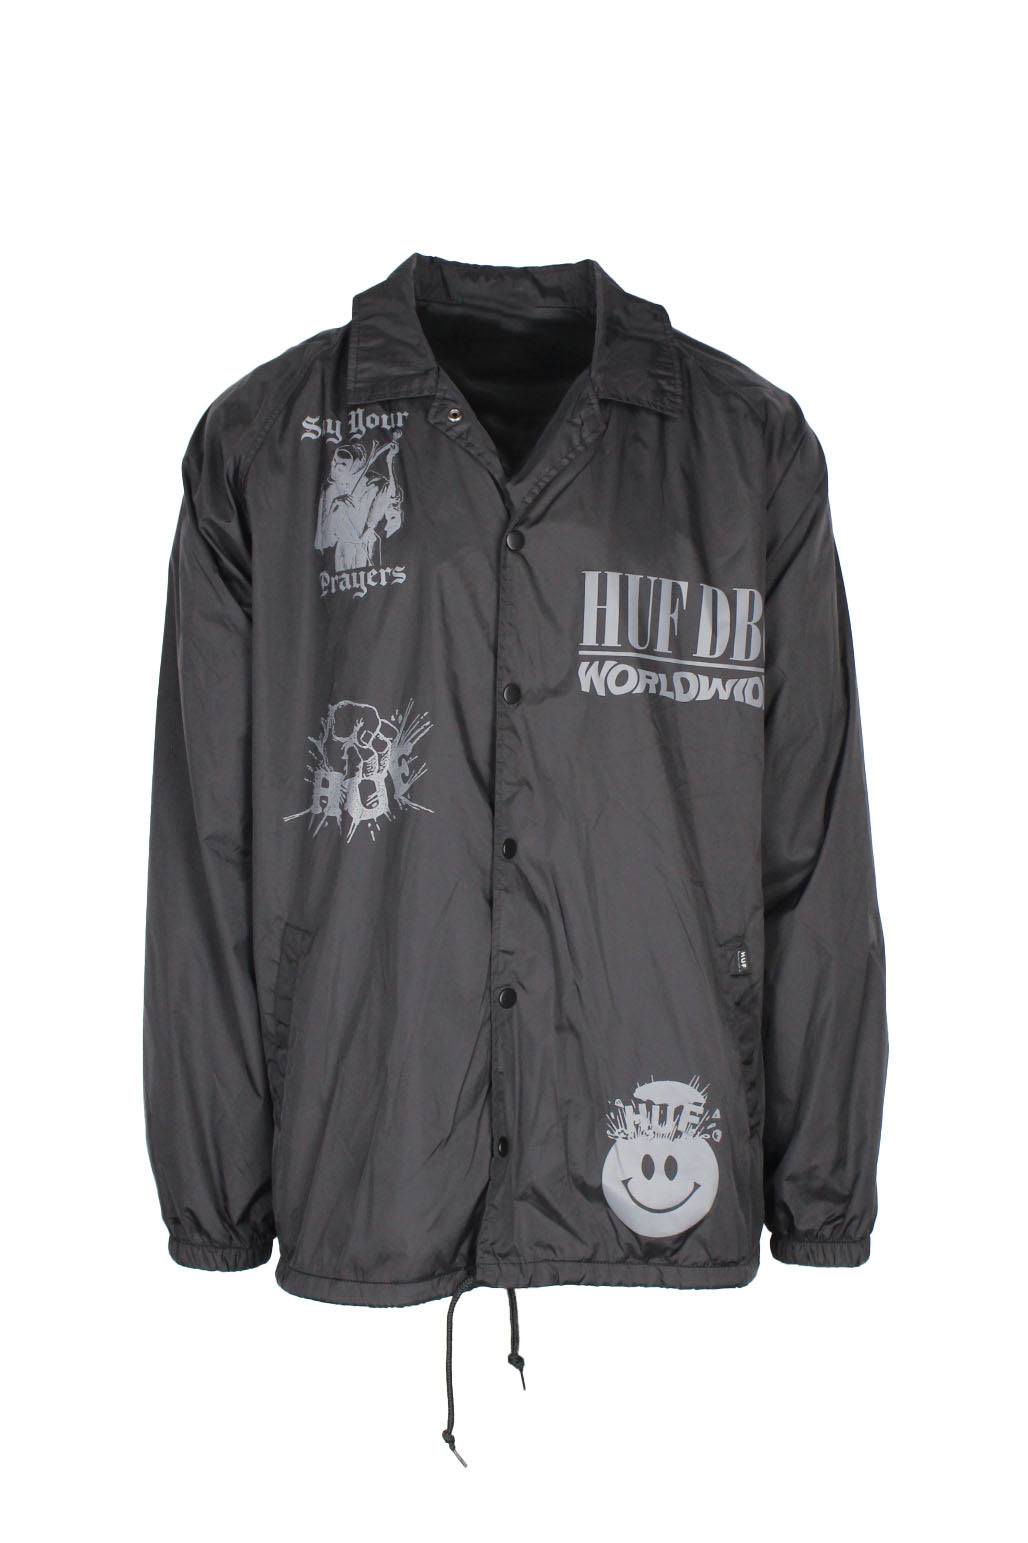 front view of huf black snap button up coach jacket. features ‘huf dbc worldwide. say your prayers.’ graphic logos printed at front/back, side hand pockets, fully lined, elastic at cuffs, and drawstring at hem.